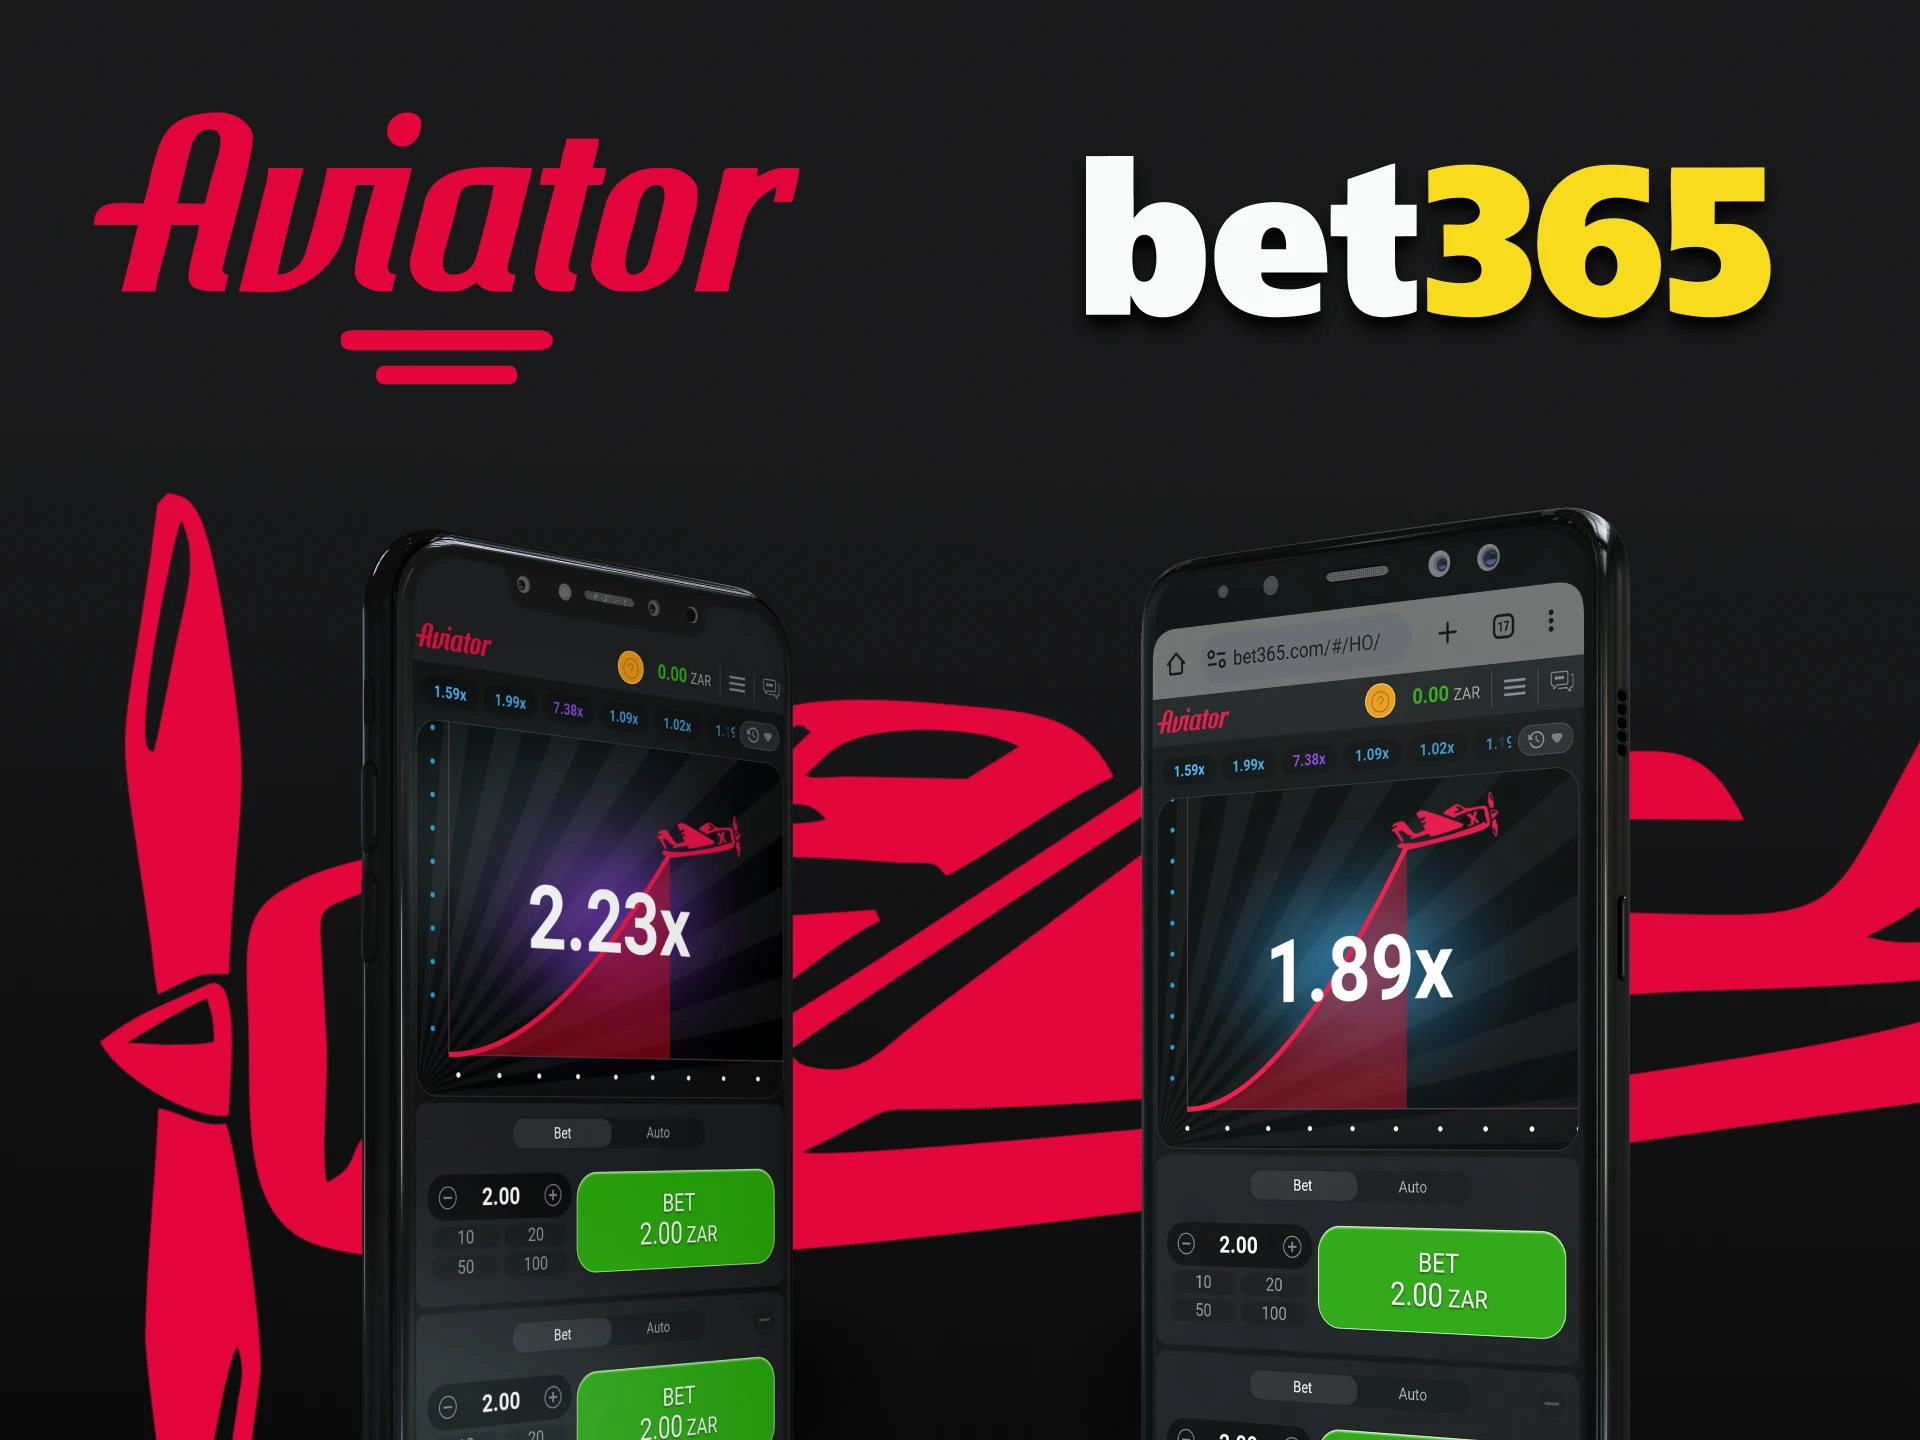 Choose your way to play Aviator at Bet365.